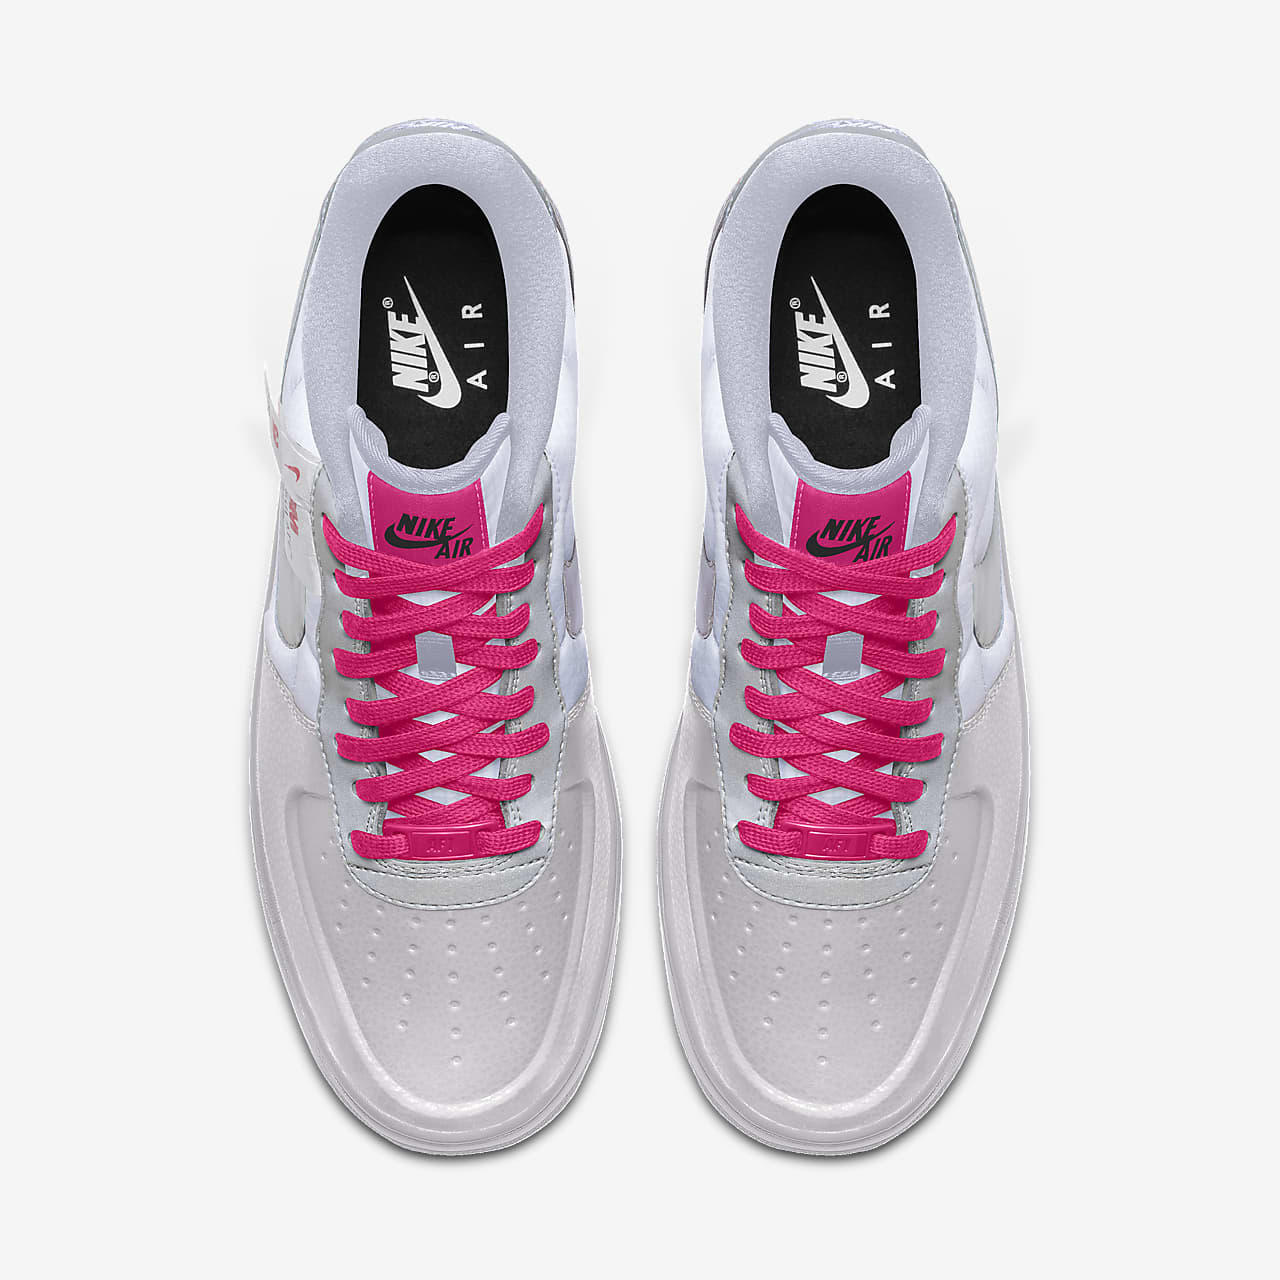 nike air personalized